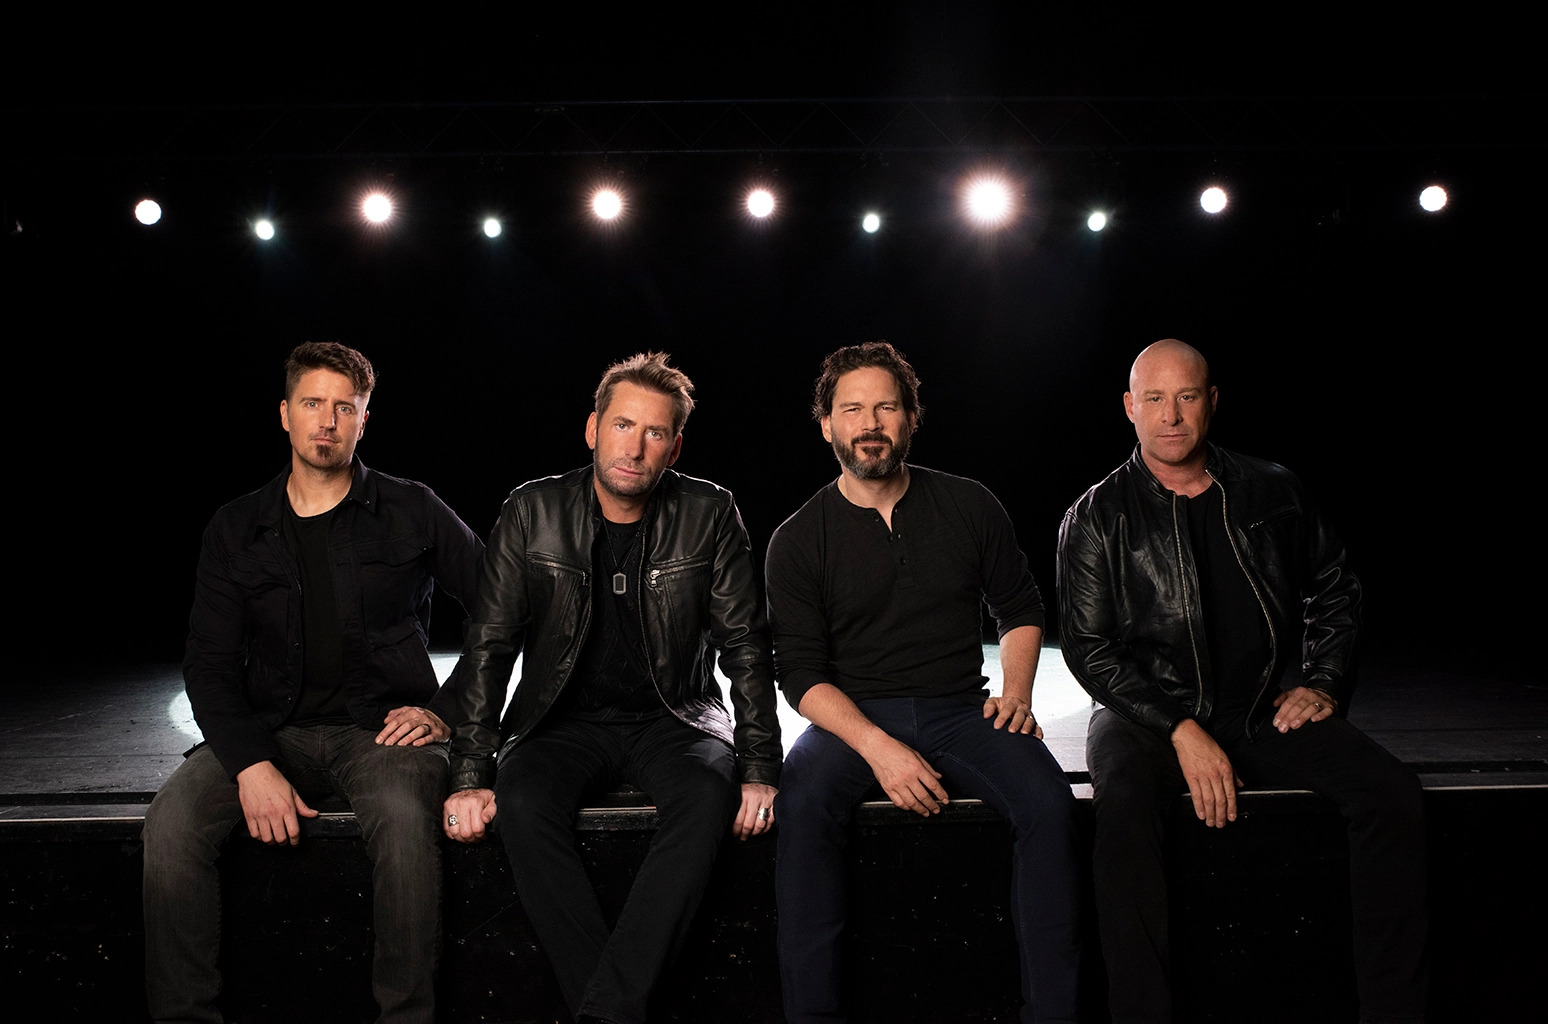 Nickelback - four men in all black outfit